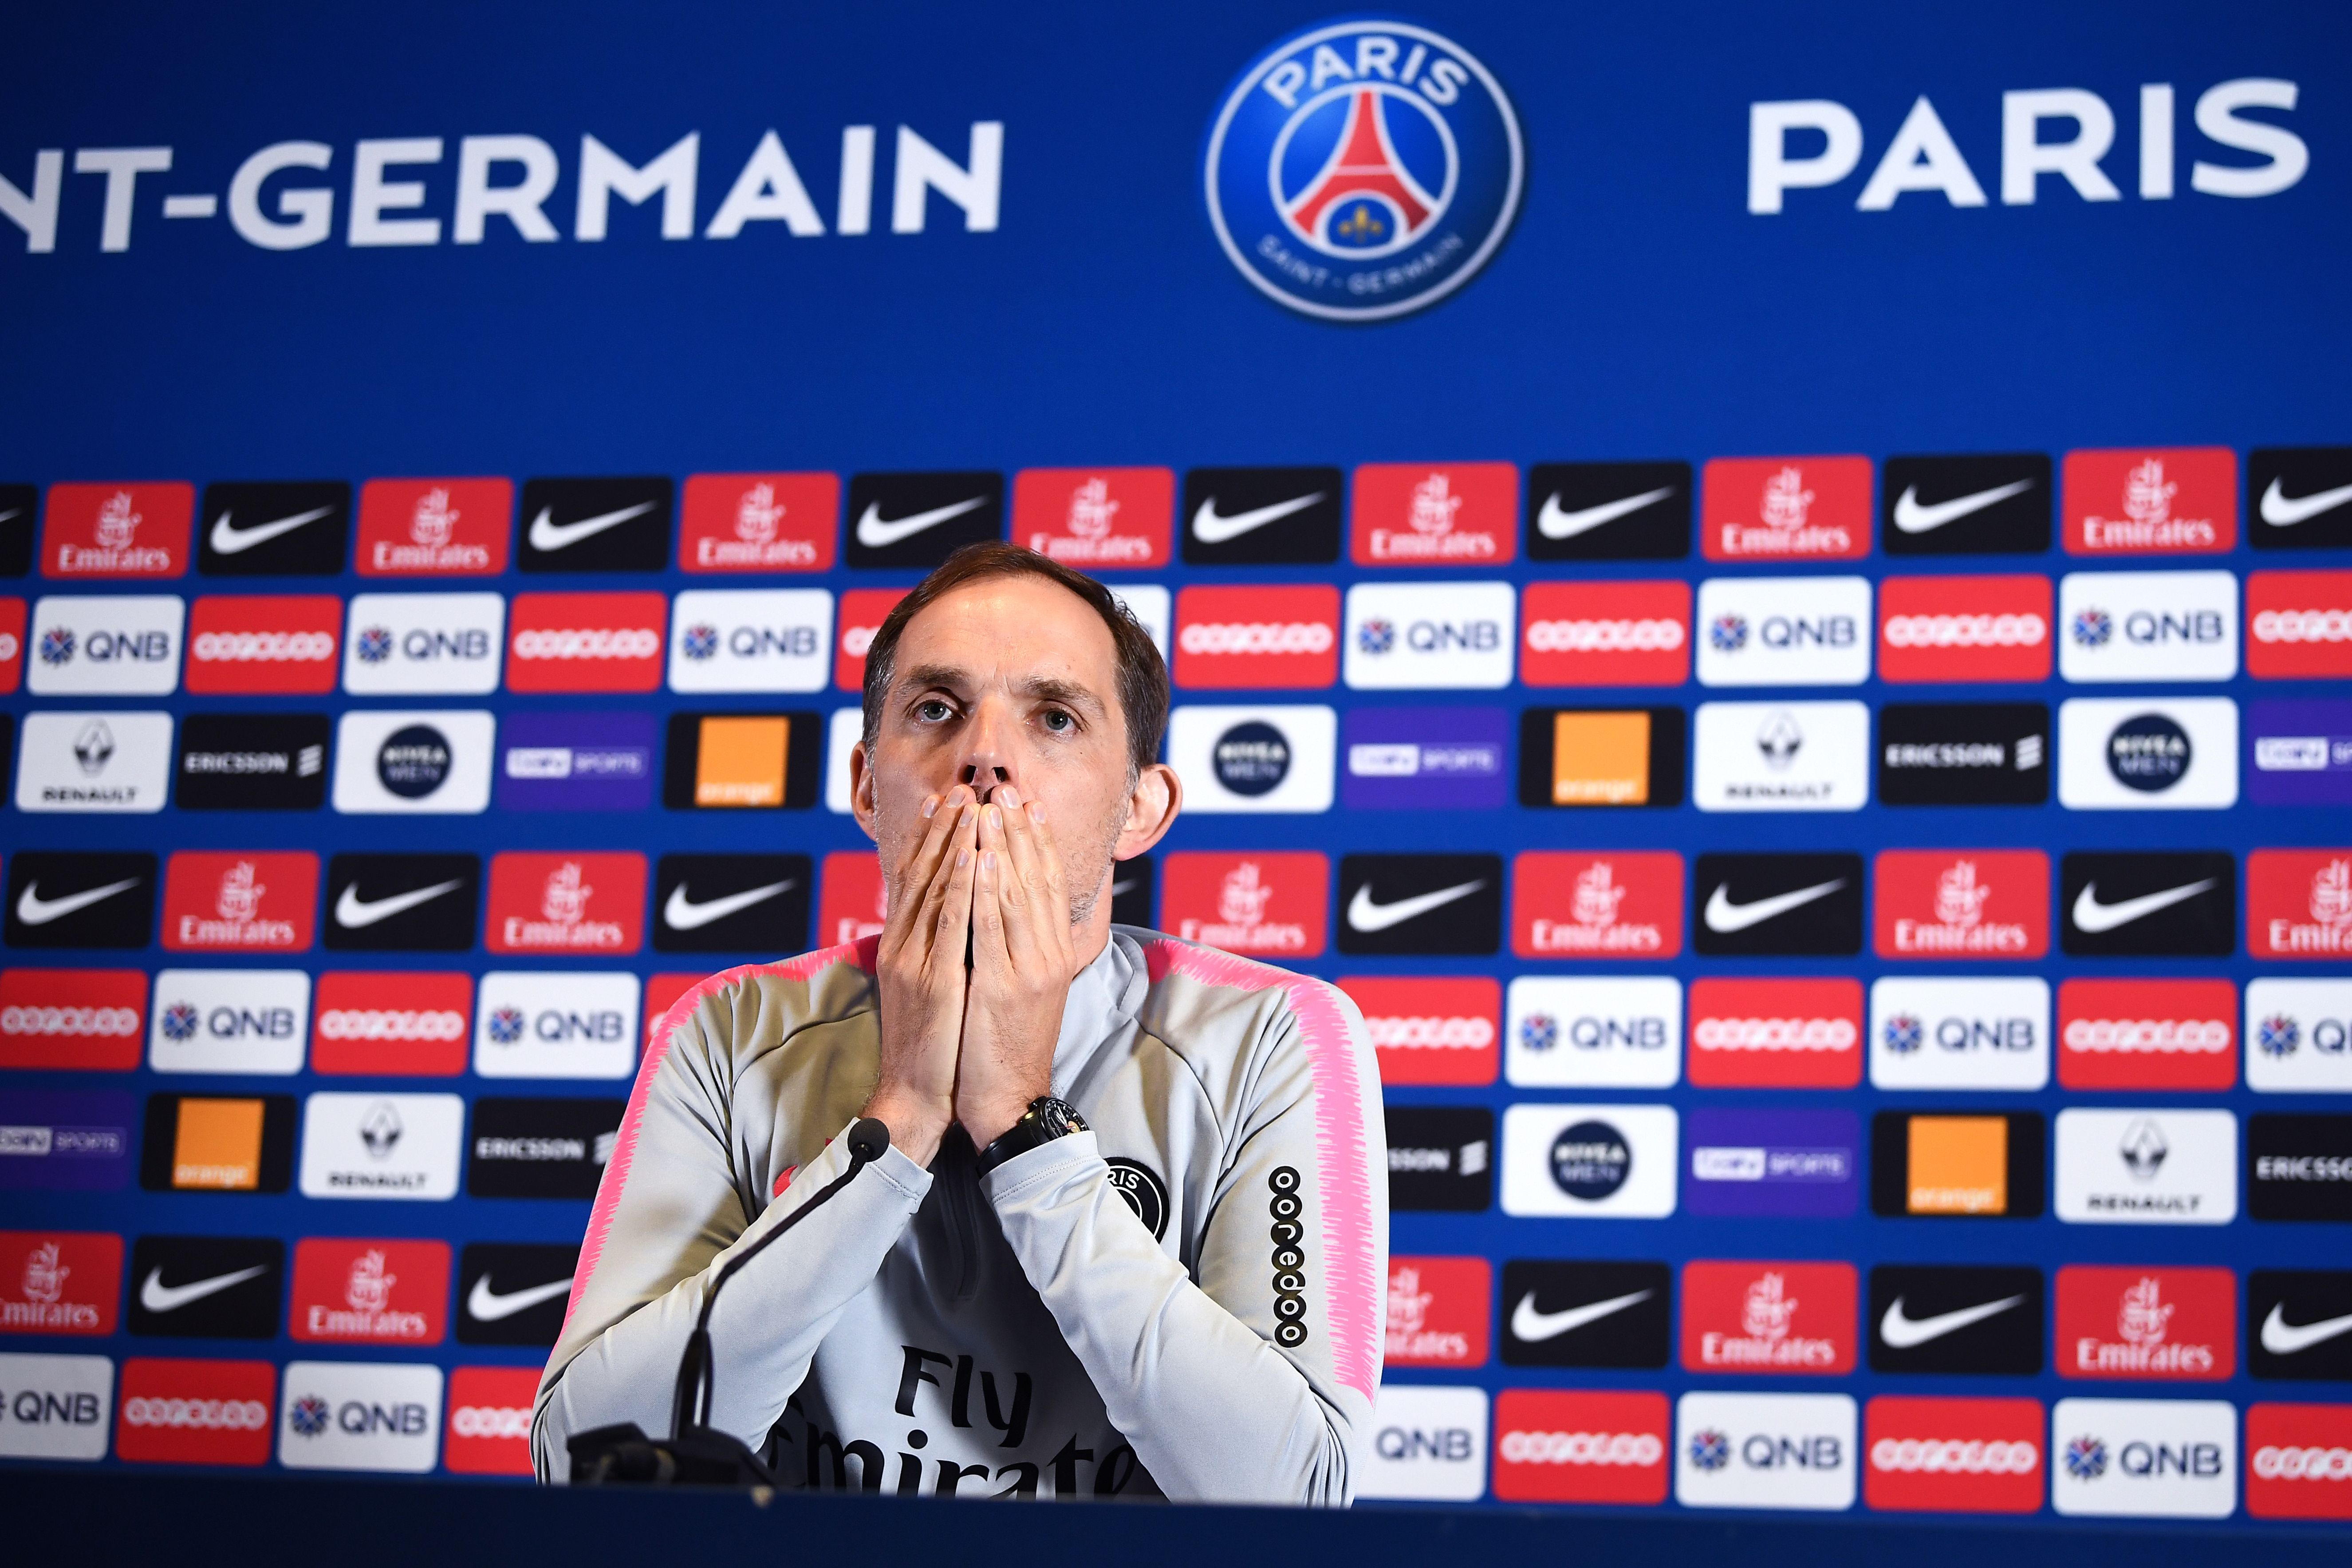 Paris Saint-Germain's German coach Thomas Tuchel answers questions during a press conference at the club's Camp des Loges in Saint-Germain-en-Laye, near Paris on April 29, 2019. - The French Cup final between Paris Saint-Germain and Rennes on April 27, went into extra time after finishing 2-2 at the end of 90 minutes at the Stade de France. Rennes beat PSG on penalties to win the French Cup final which they last lifted in 1971. (Photo by Anne-Christine POUJOULAT / AFP)        (Photo credit should read ANNE-CHRISTINE POUJOULAT/AFP/Getty Images)